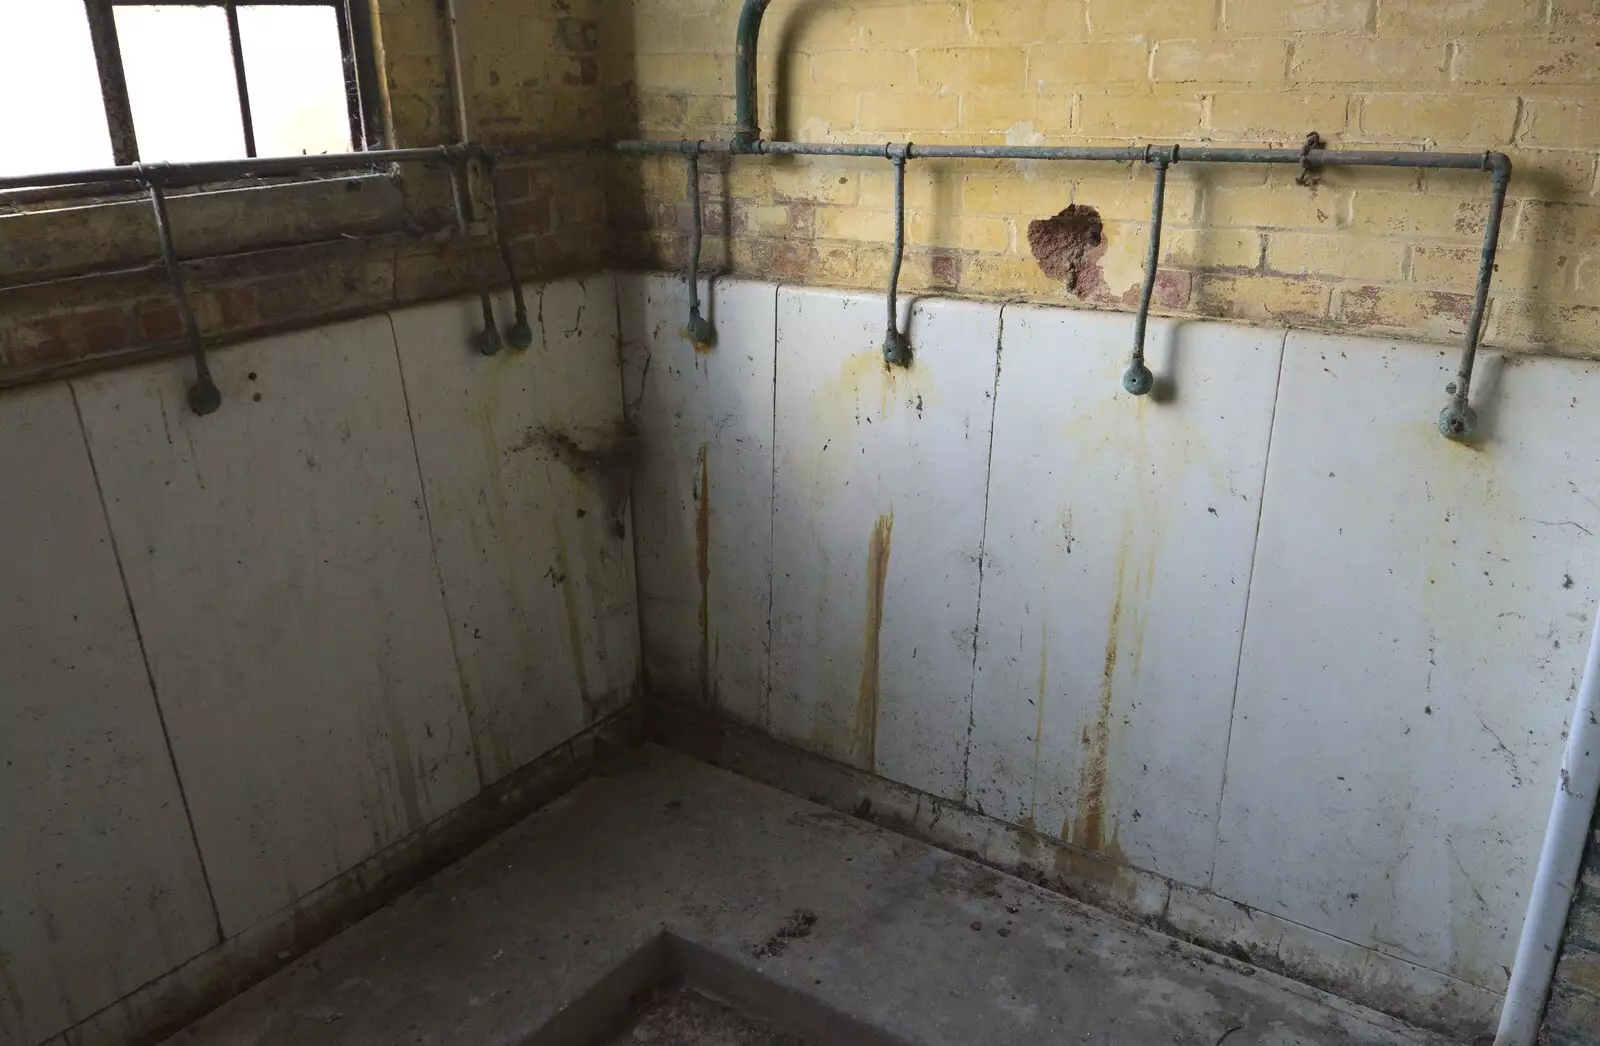 A row of original wall urinals, from A 1940s Timewarp, Site 4, Bungay Airfield, Flixton, Suffolk - 9th June 2022